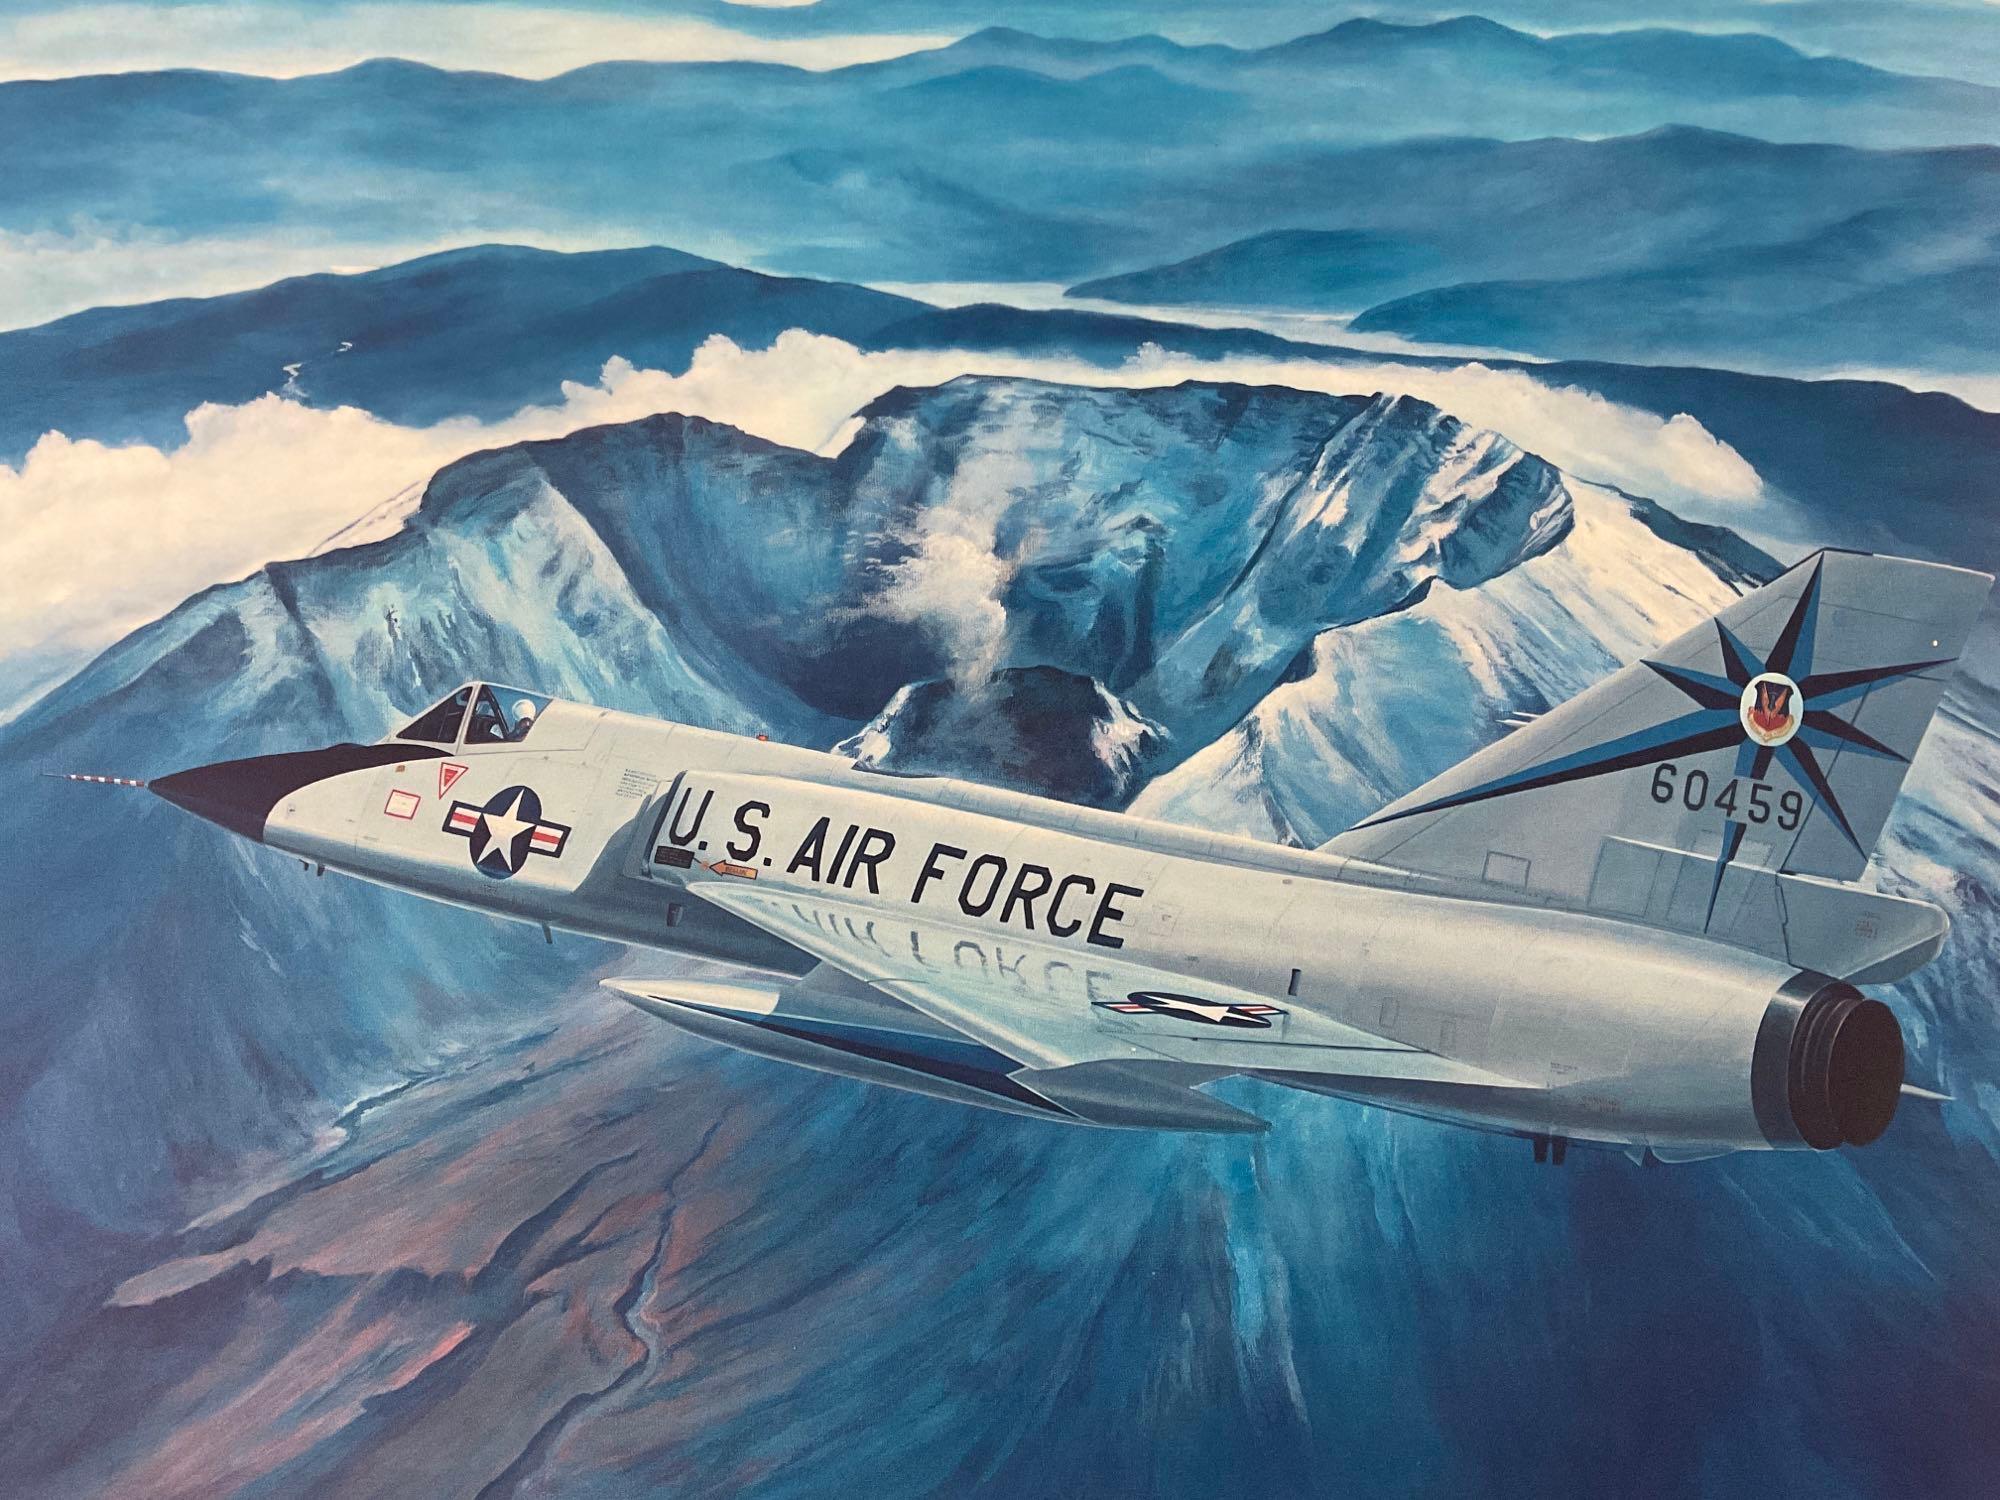 Signed and numbered US Air Force jet art print by Richard R. Broome, #ed 253/350, approx 28 x 23 in.